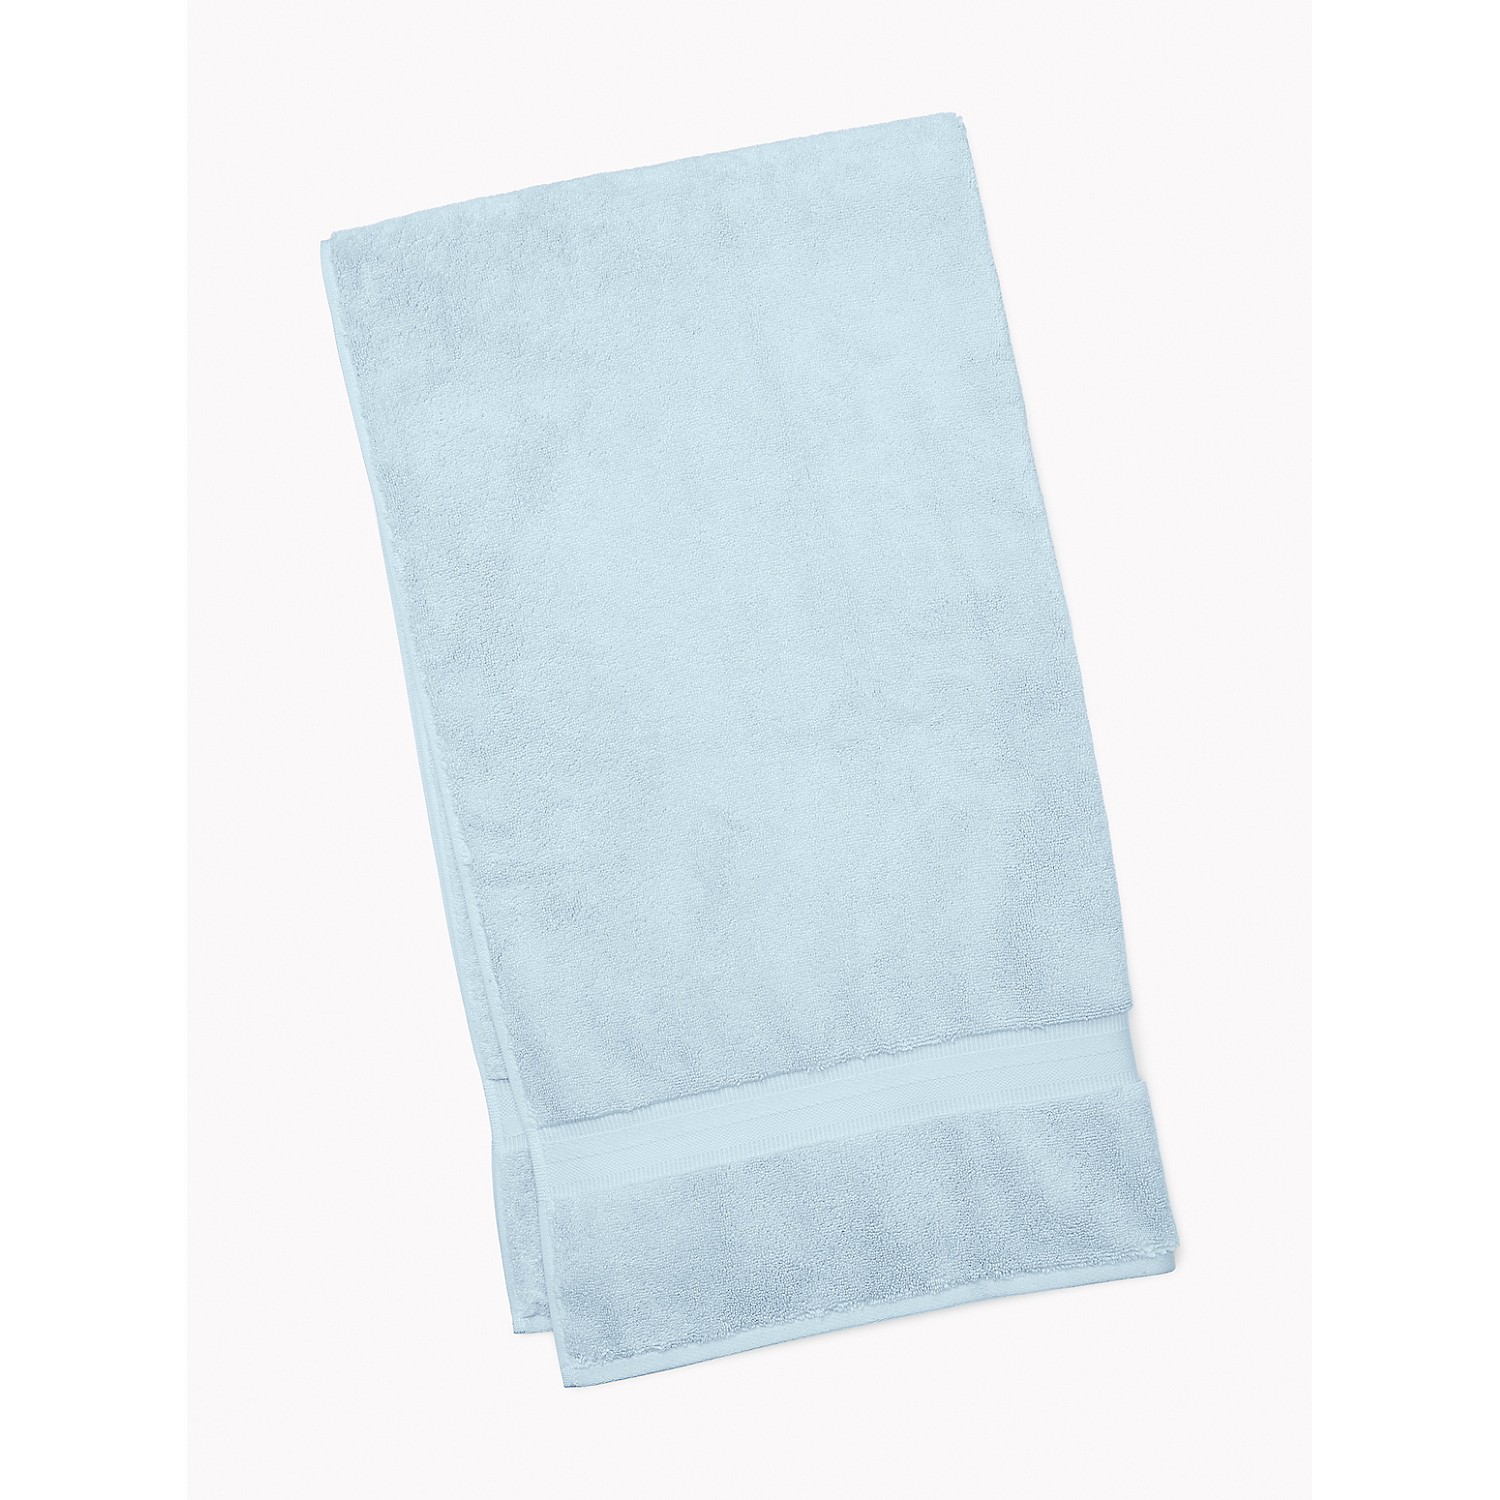 TOMMY HILFIGER Signature Solid Bath Towel in Cashmere Blue